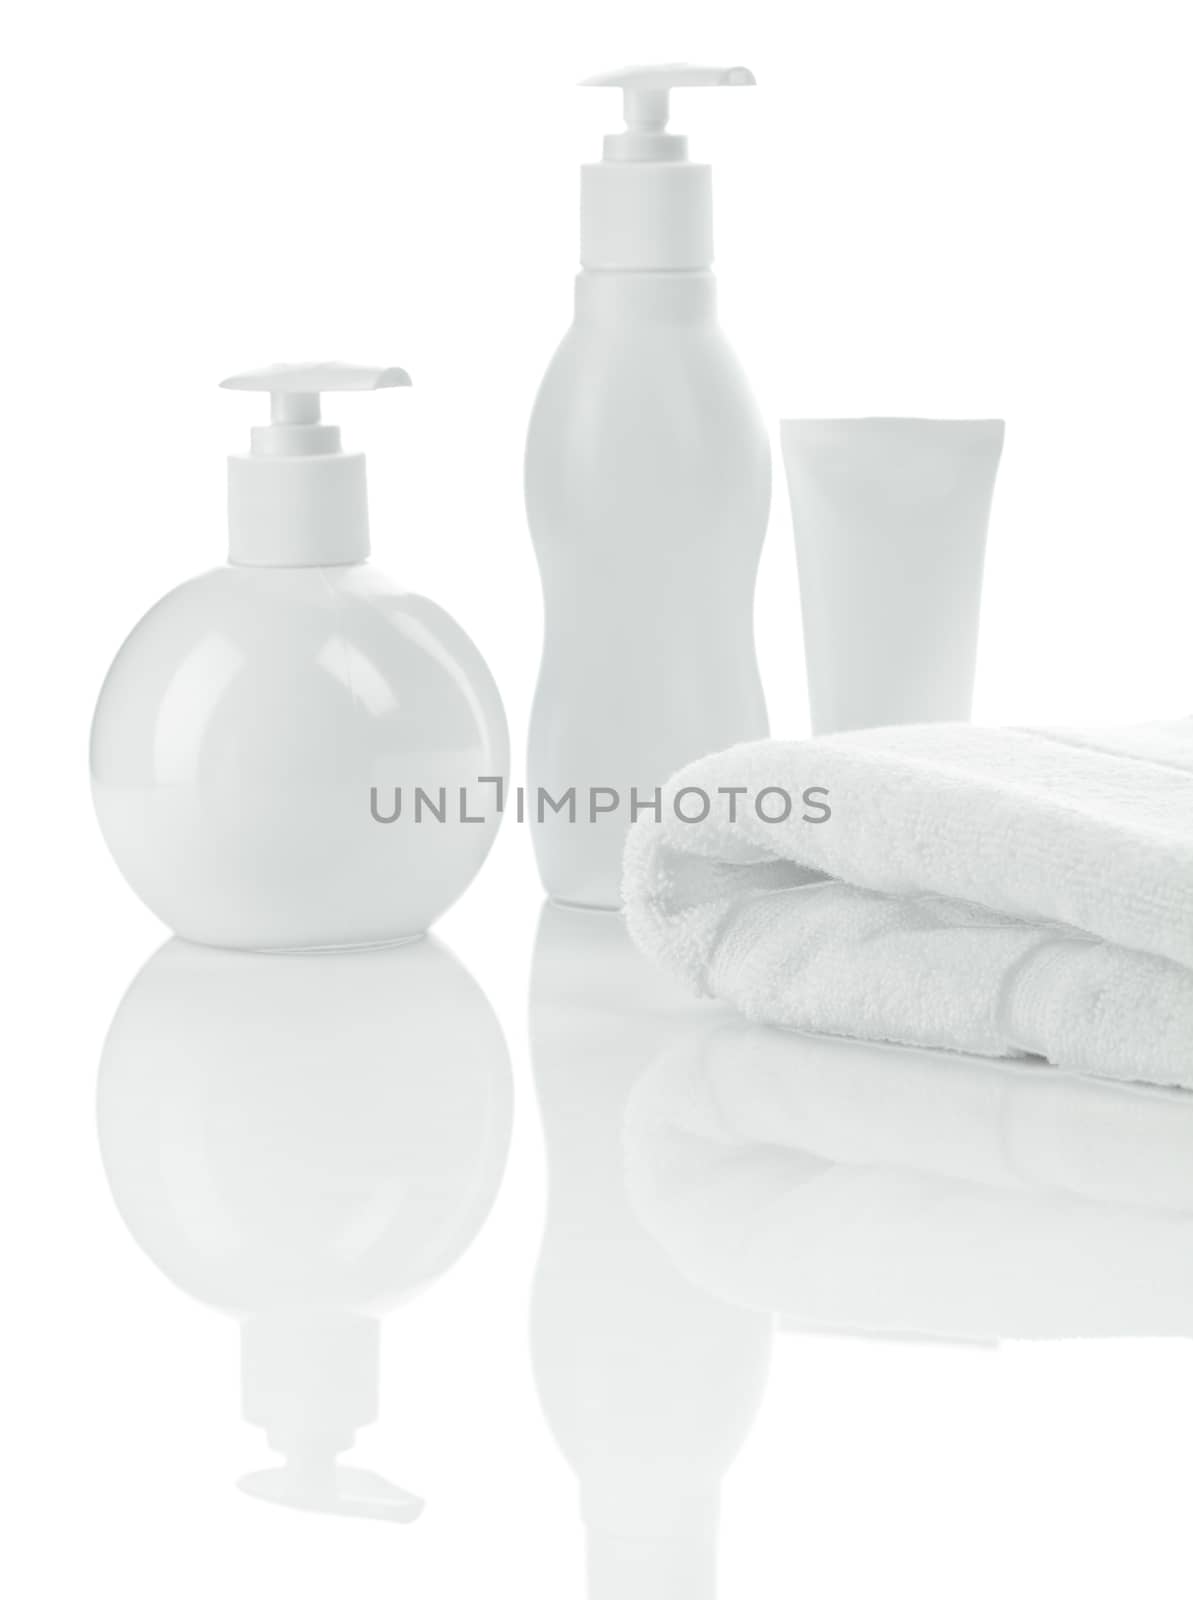 bottles tube and towel by mihalec